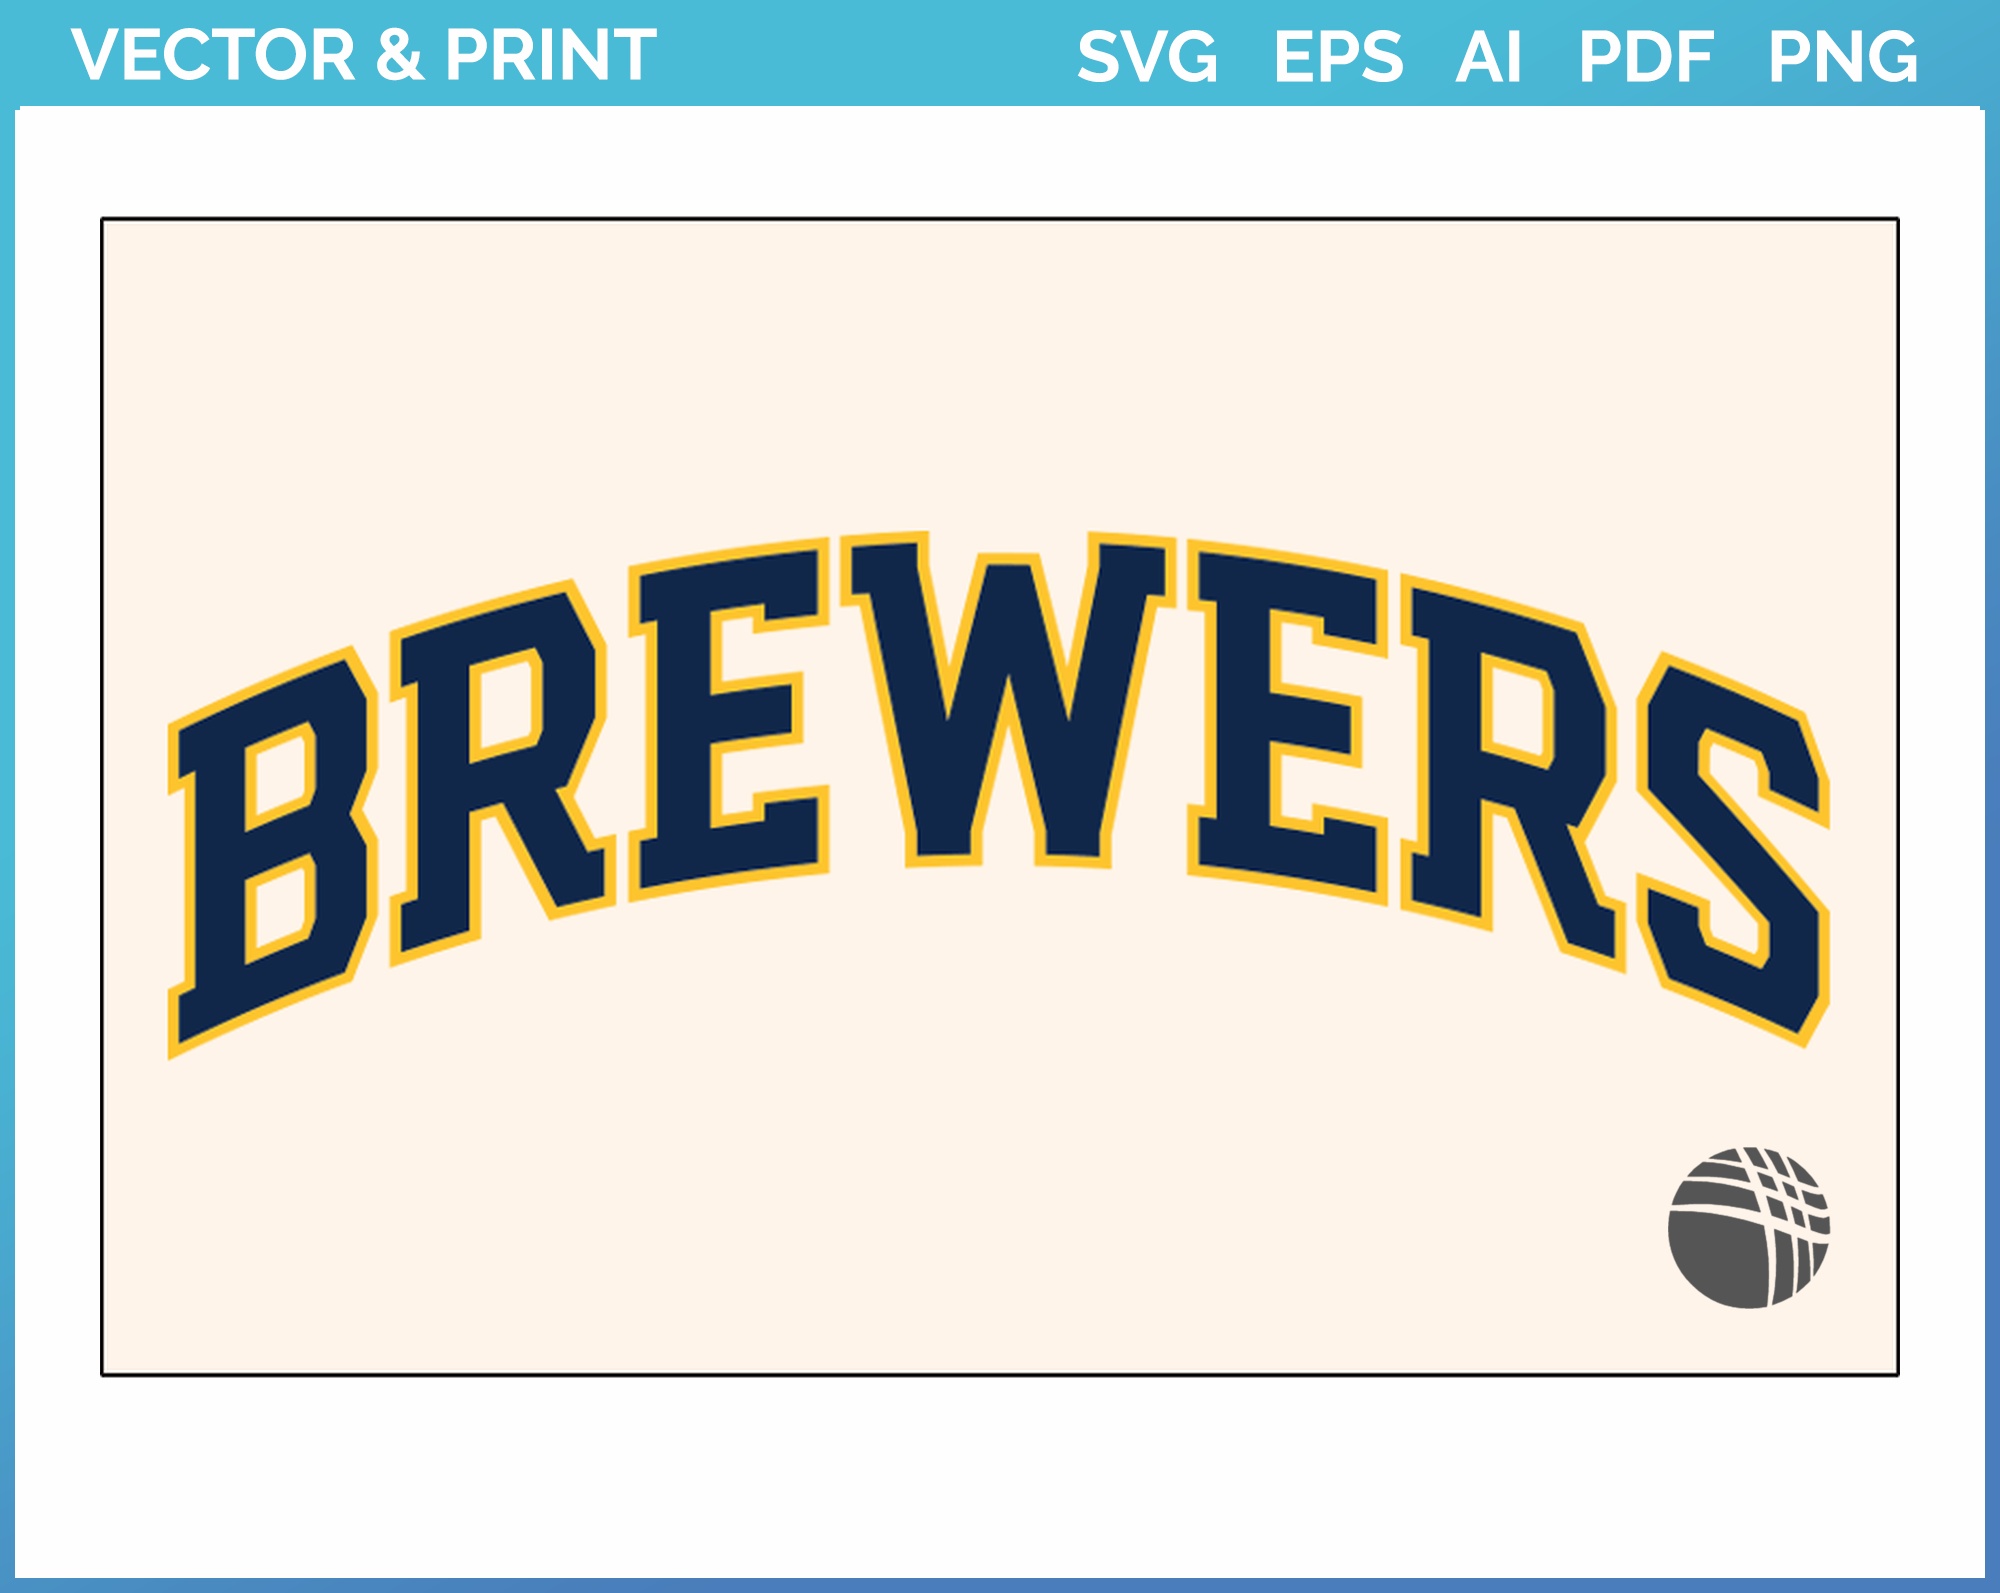 svg files brewers svg